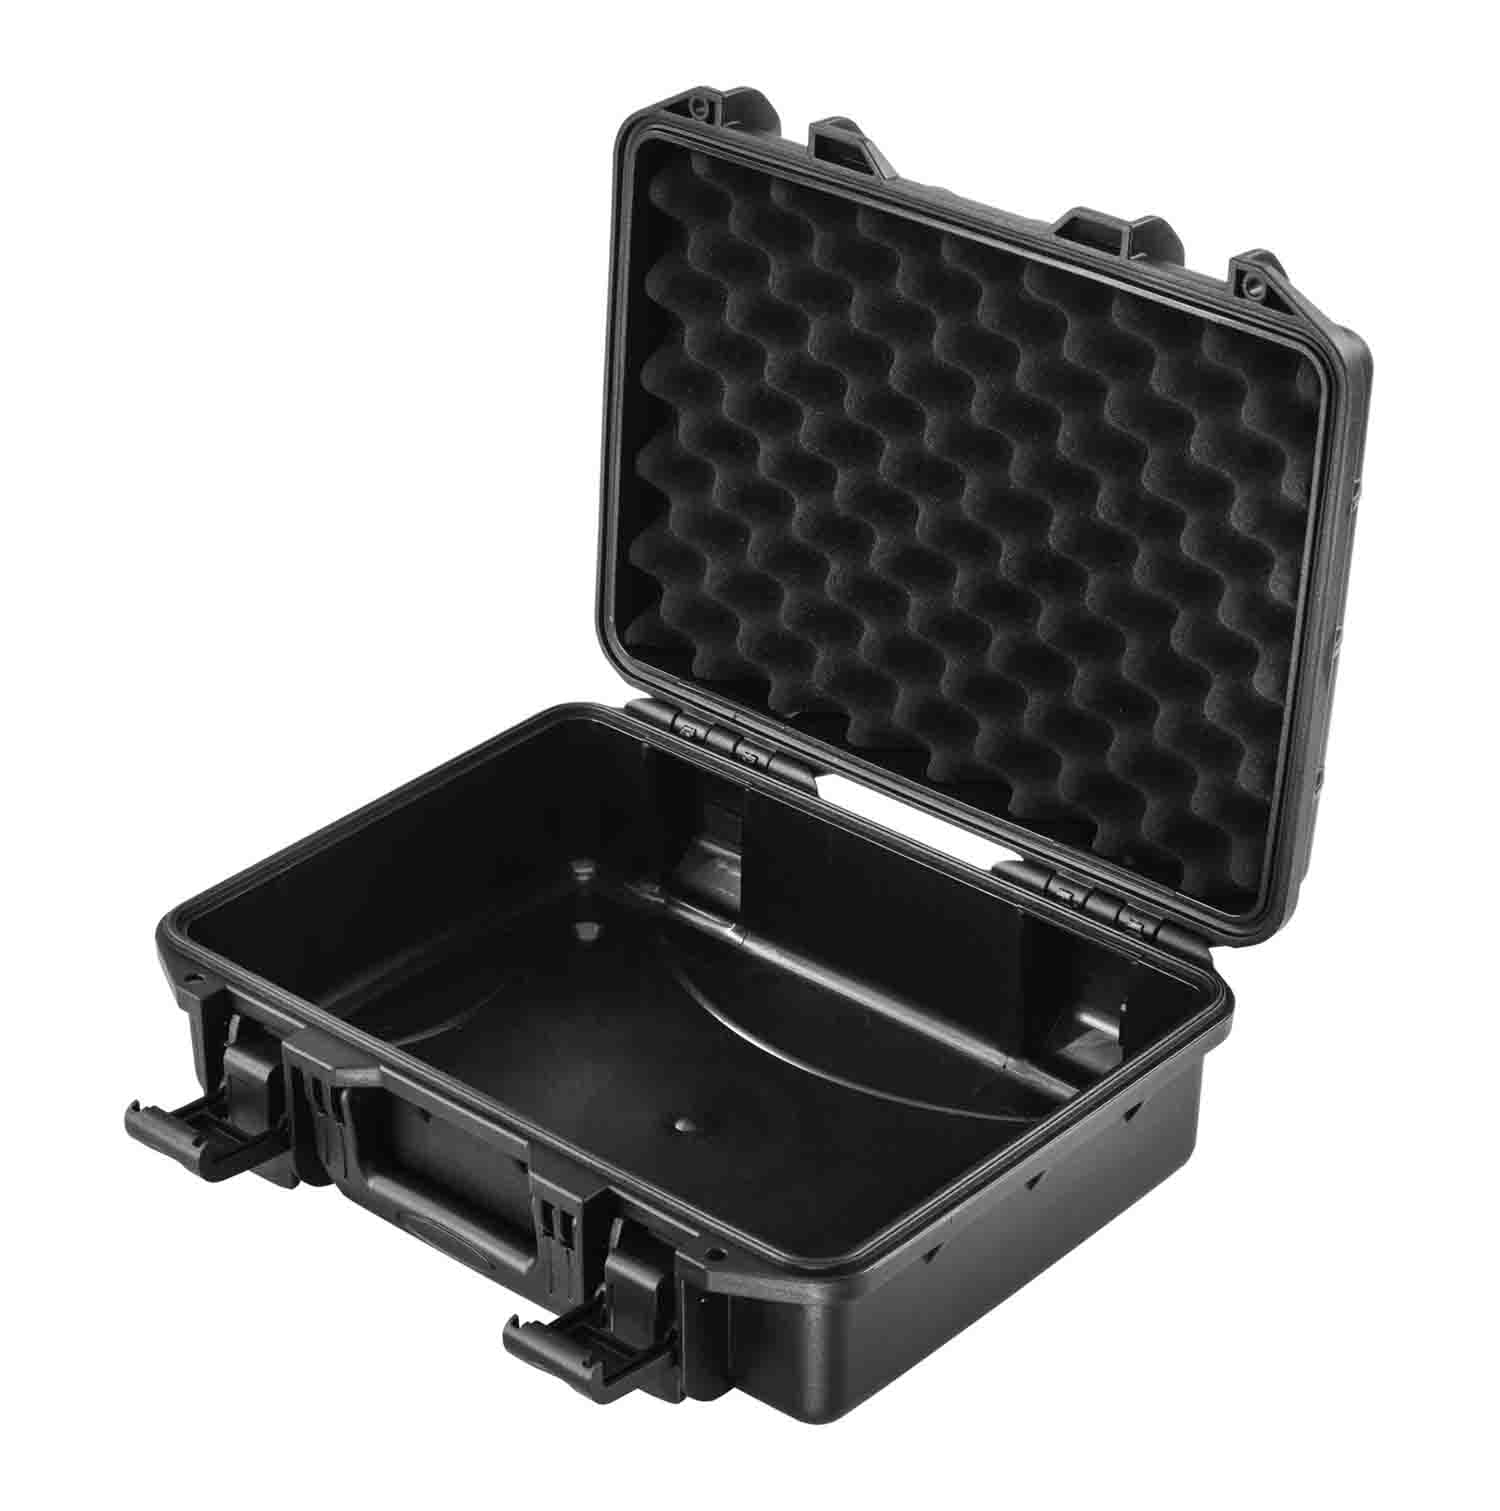 Odyssey VU151005NF Vulcan Injection-Molded Utility Case - 15.25 x 10.5 x 3.5" Interior - Hollywood DJ